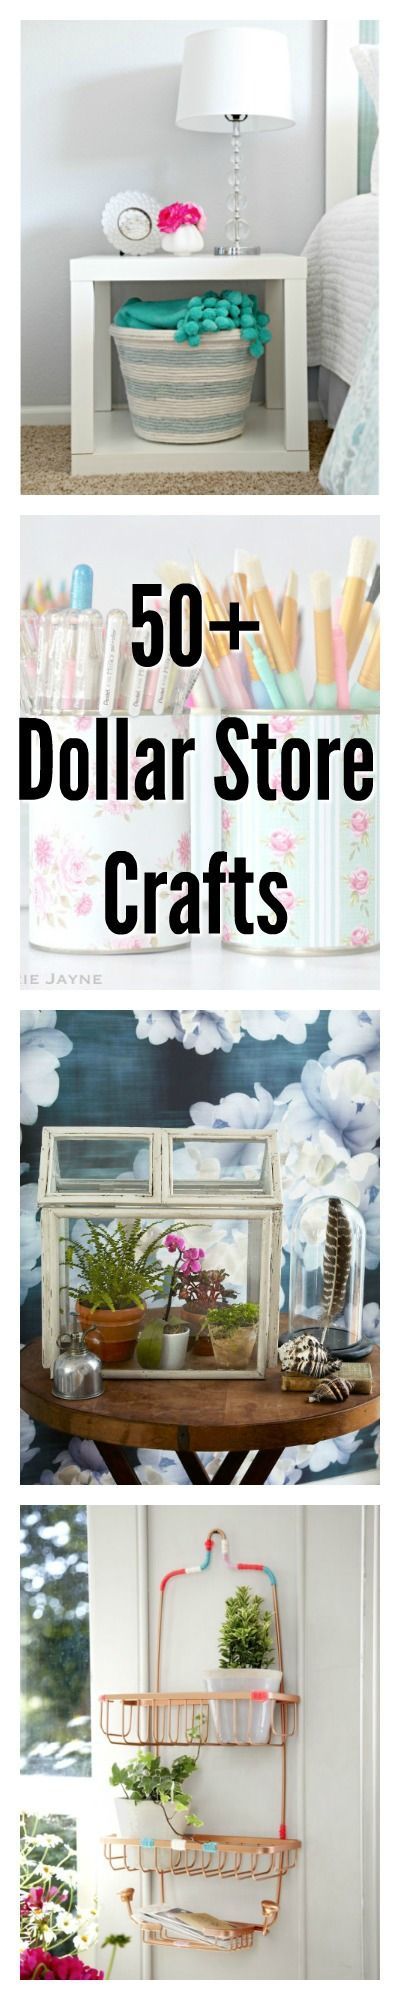 From organization solutions to beautiful decor, you wont believe these crafty ideas started at the dollar store.